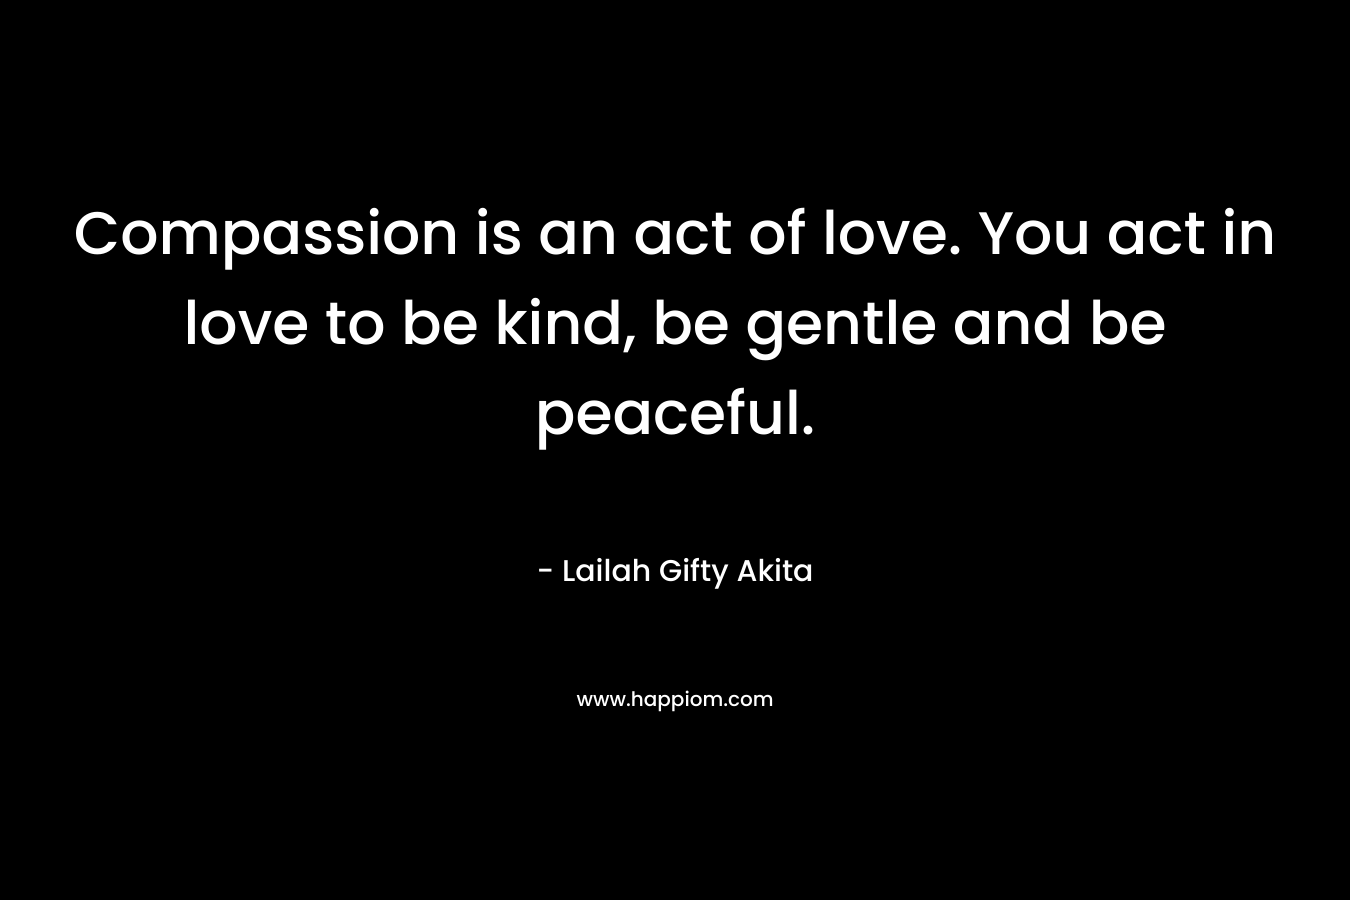 Compassion is an act of love. You act in love to be kind, be gentle and be peaceful.